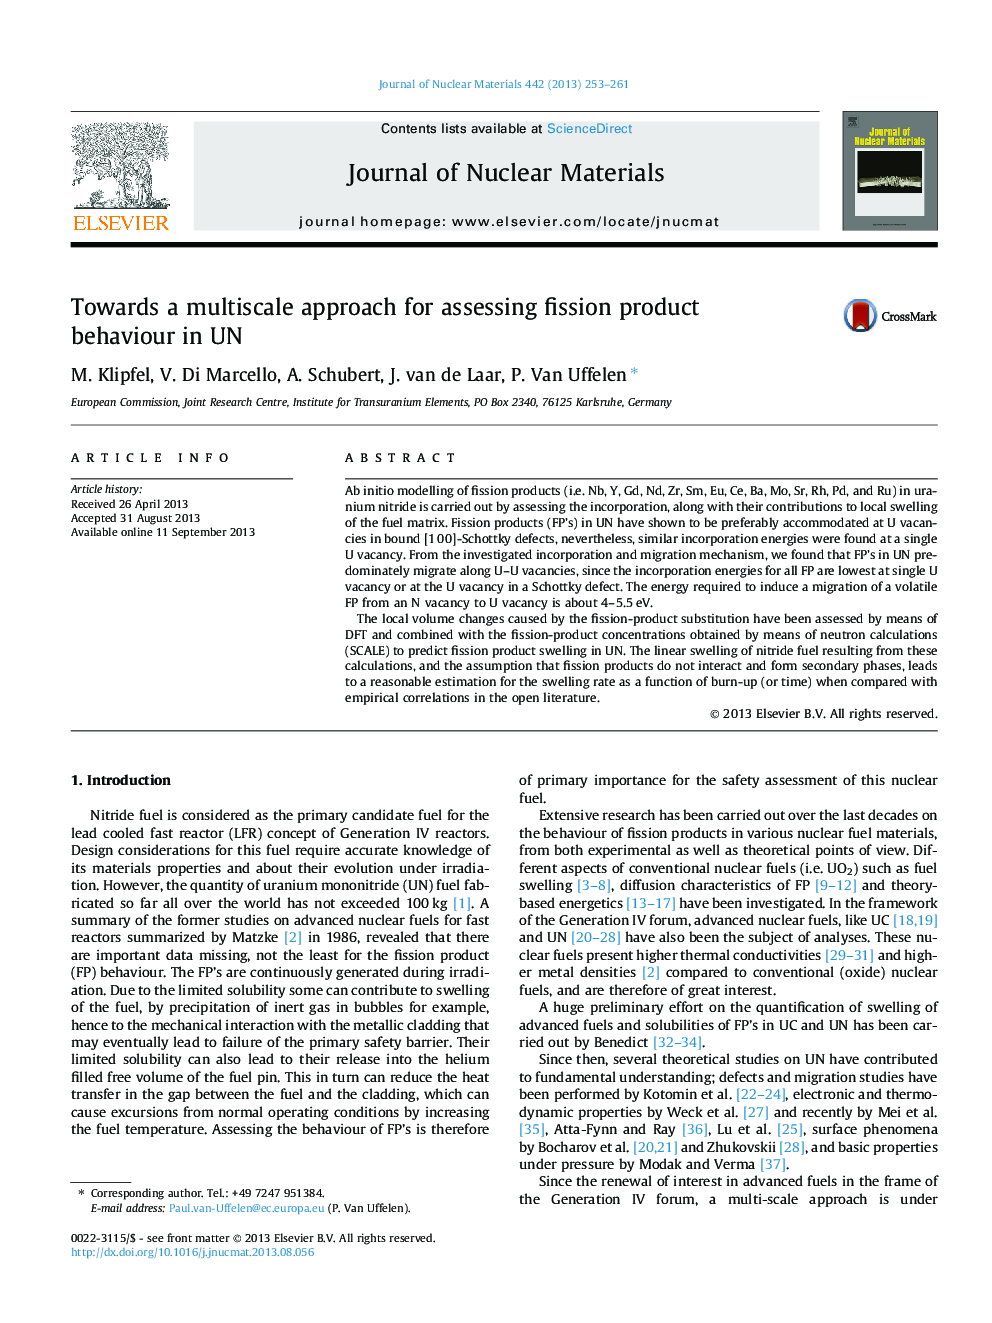 Towards a multiscale approach for assessing fission product behaviour in UN